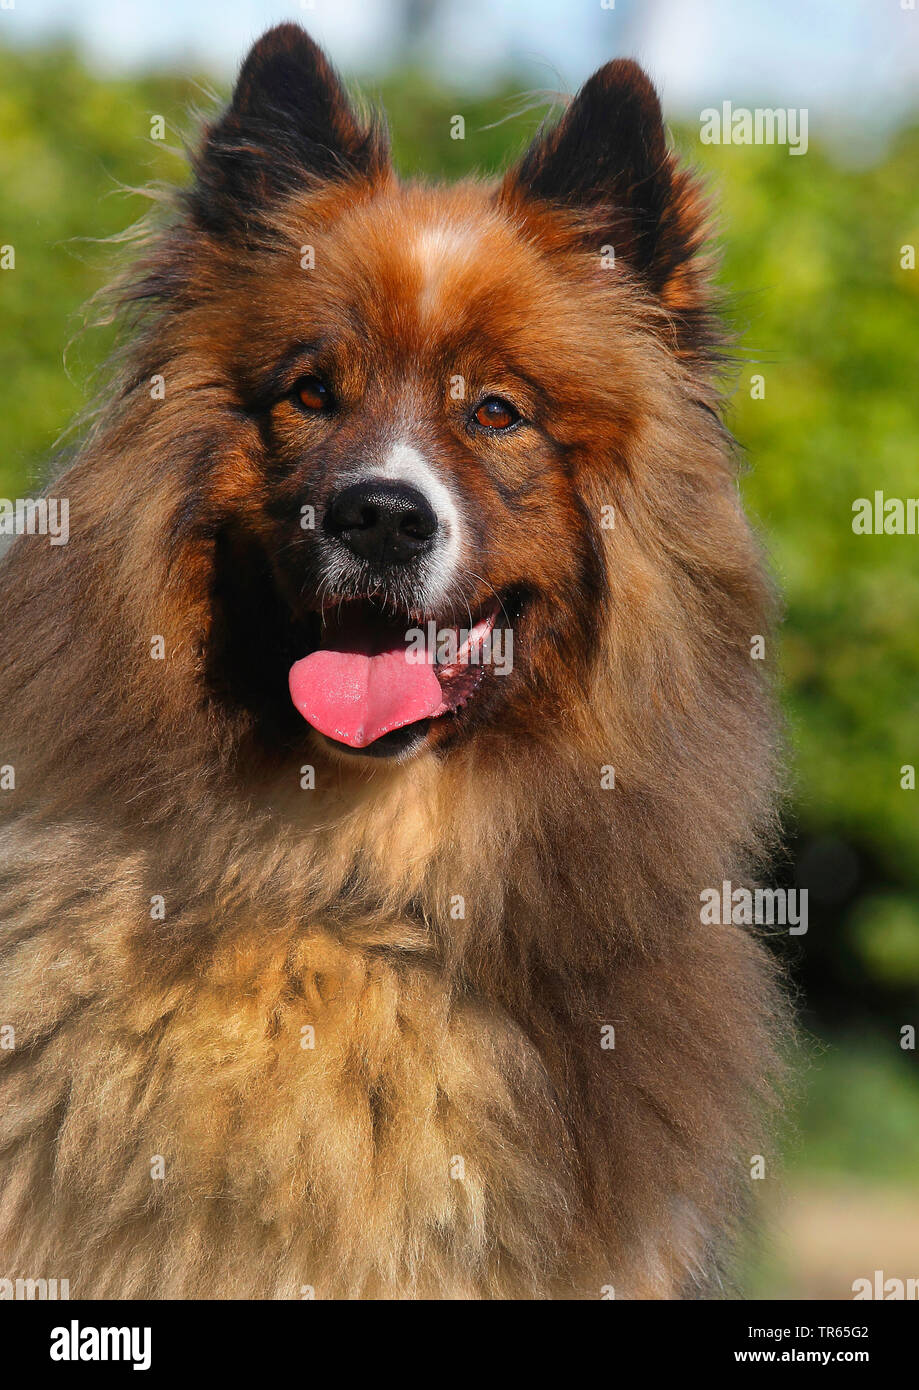 Elo, Great Elo (Canis lupus f. familiaris), five years old male dog, portrait, Germany Stock Photo